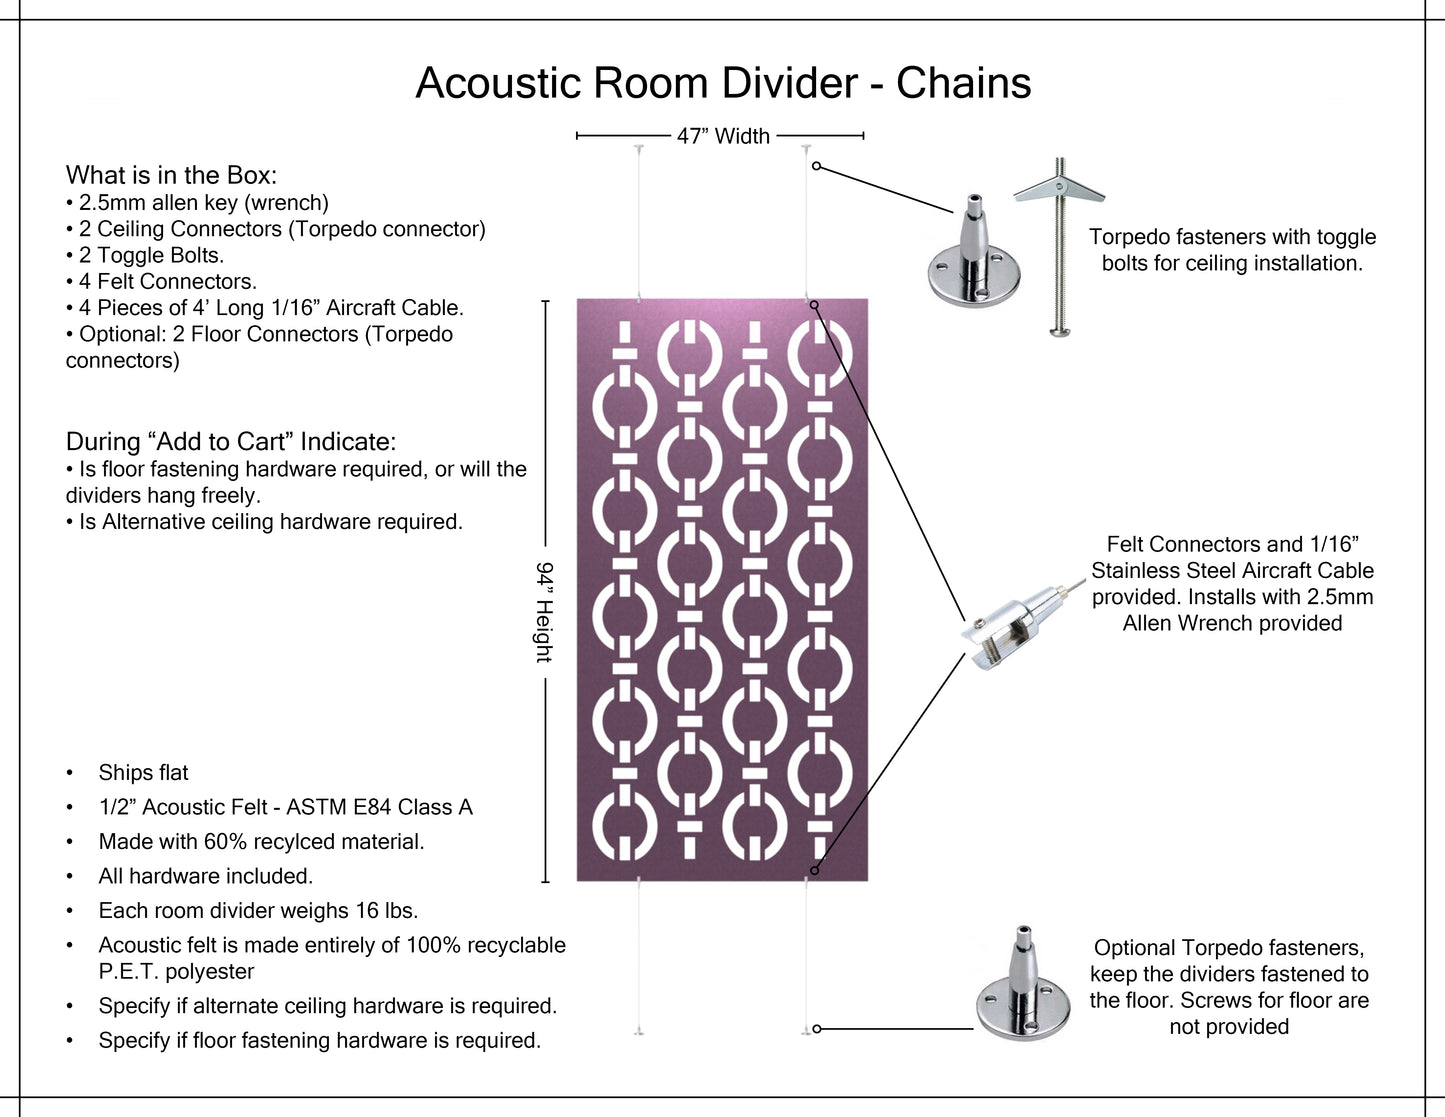 4x8 Acoustic Room Divider - Chains